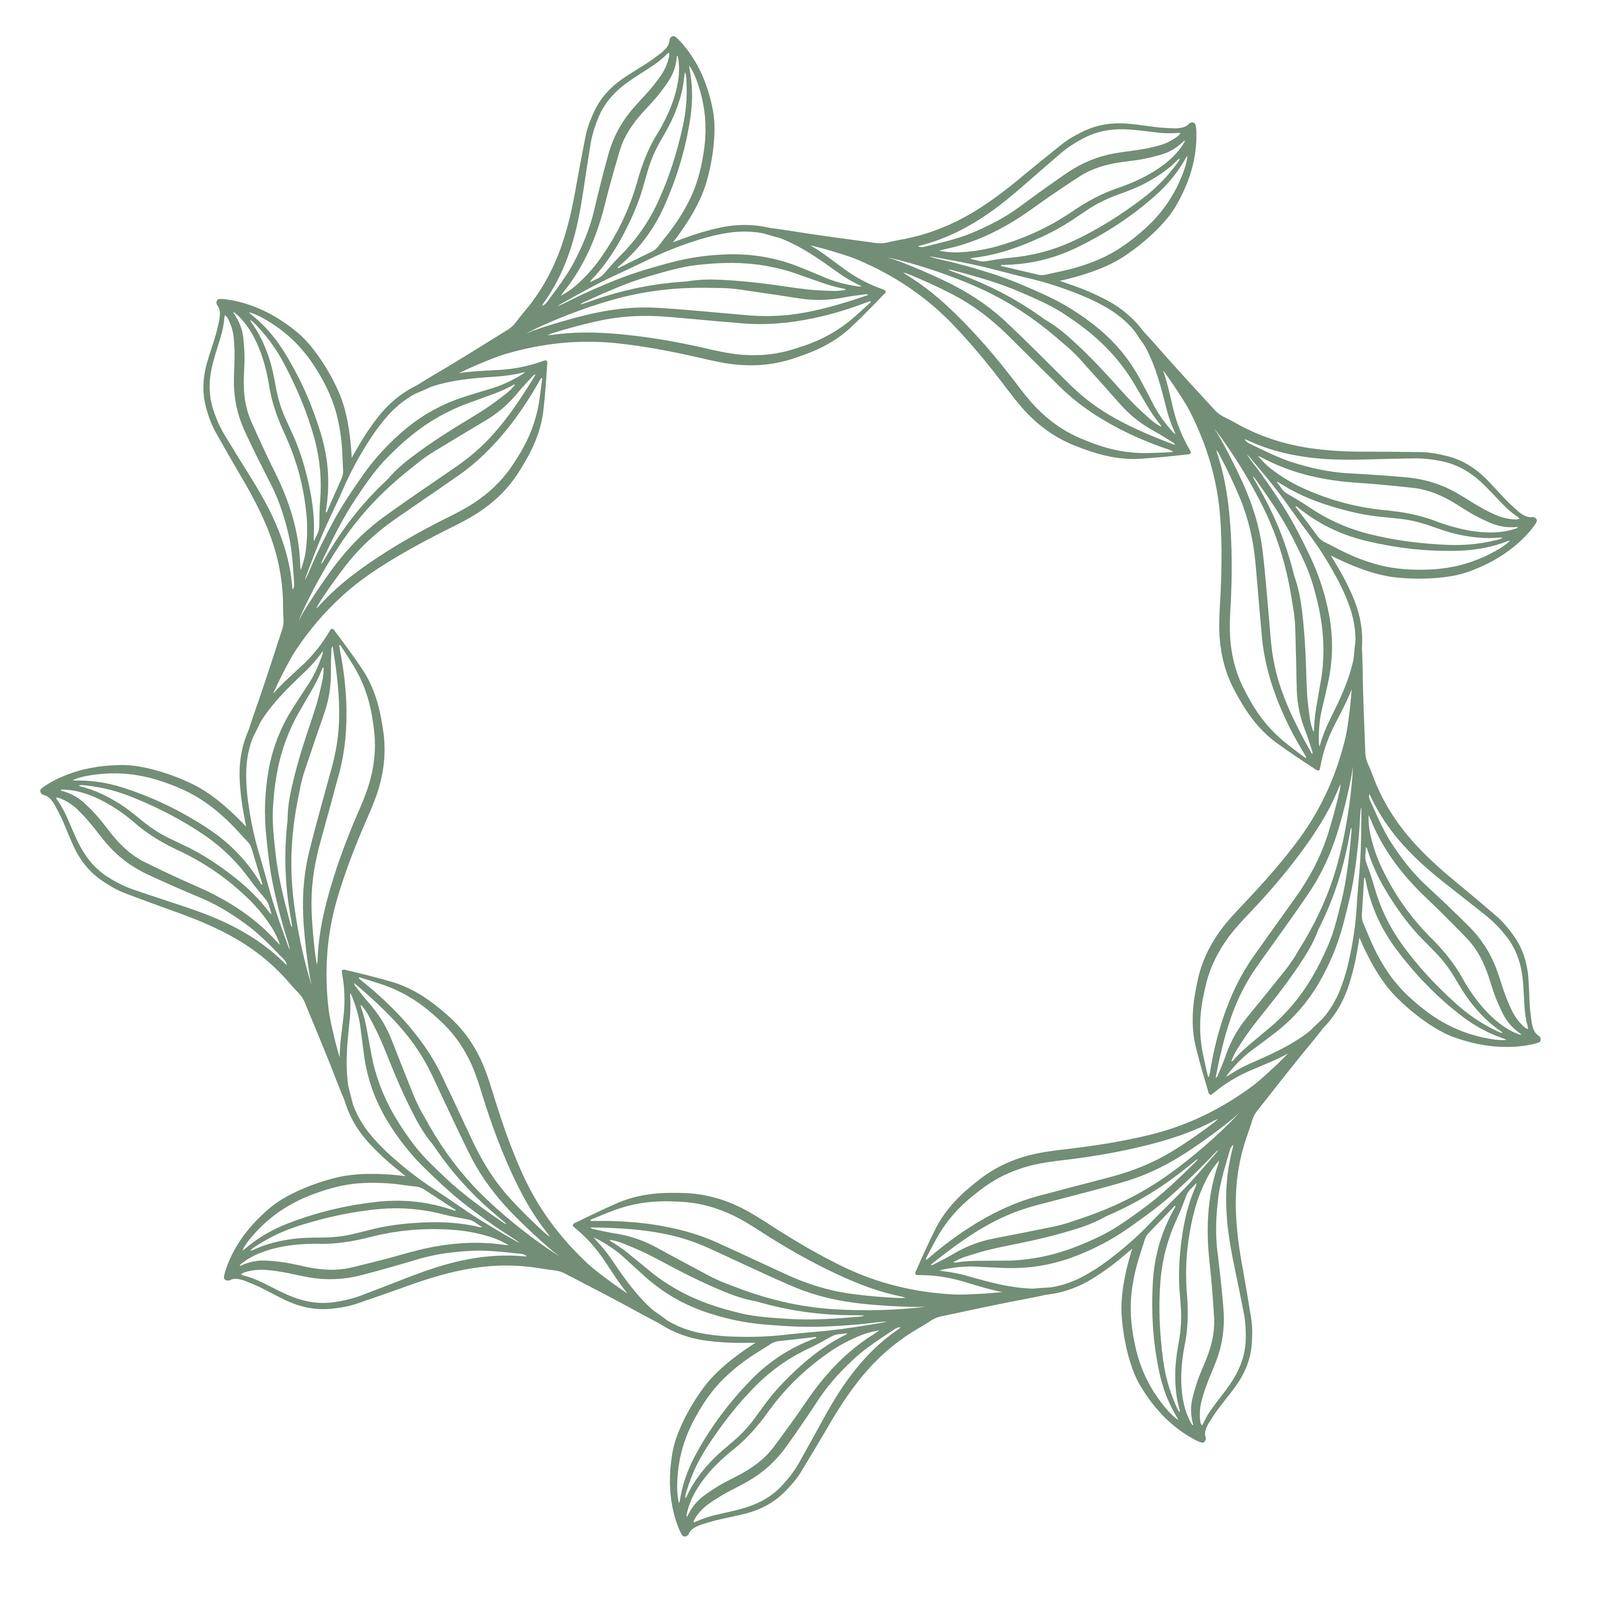 Botanical graceful circular frame of leaves, vector illustration. Beautiful leafy wreath. Botanical contour for congratulations or postcards. Isolated round template.